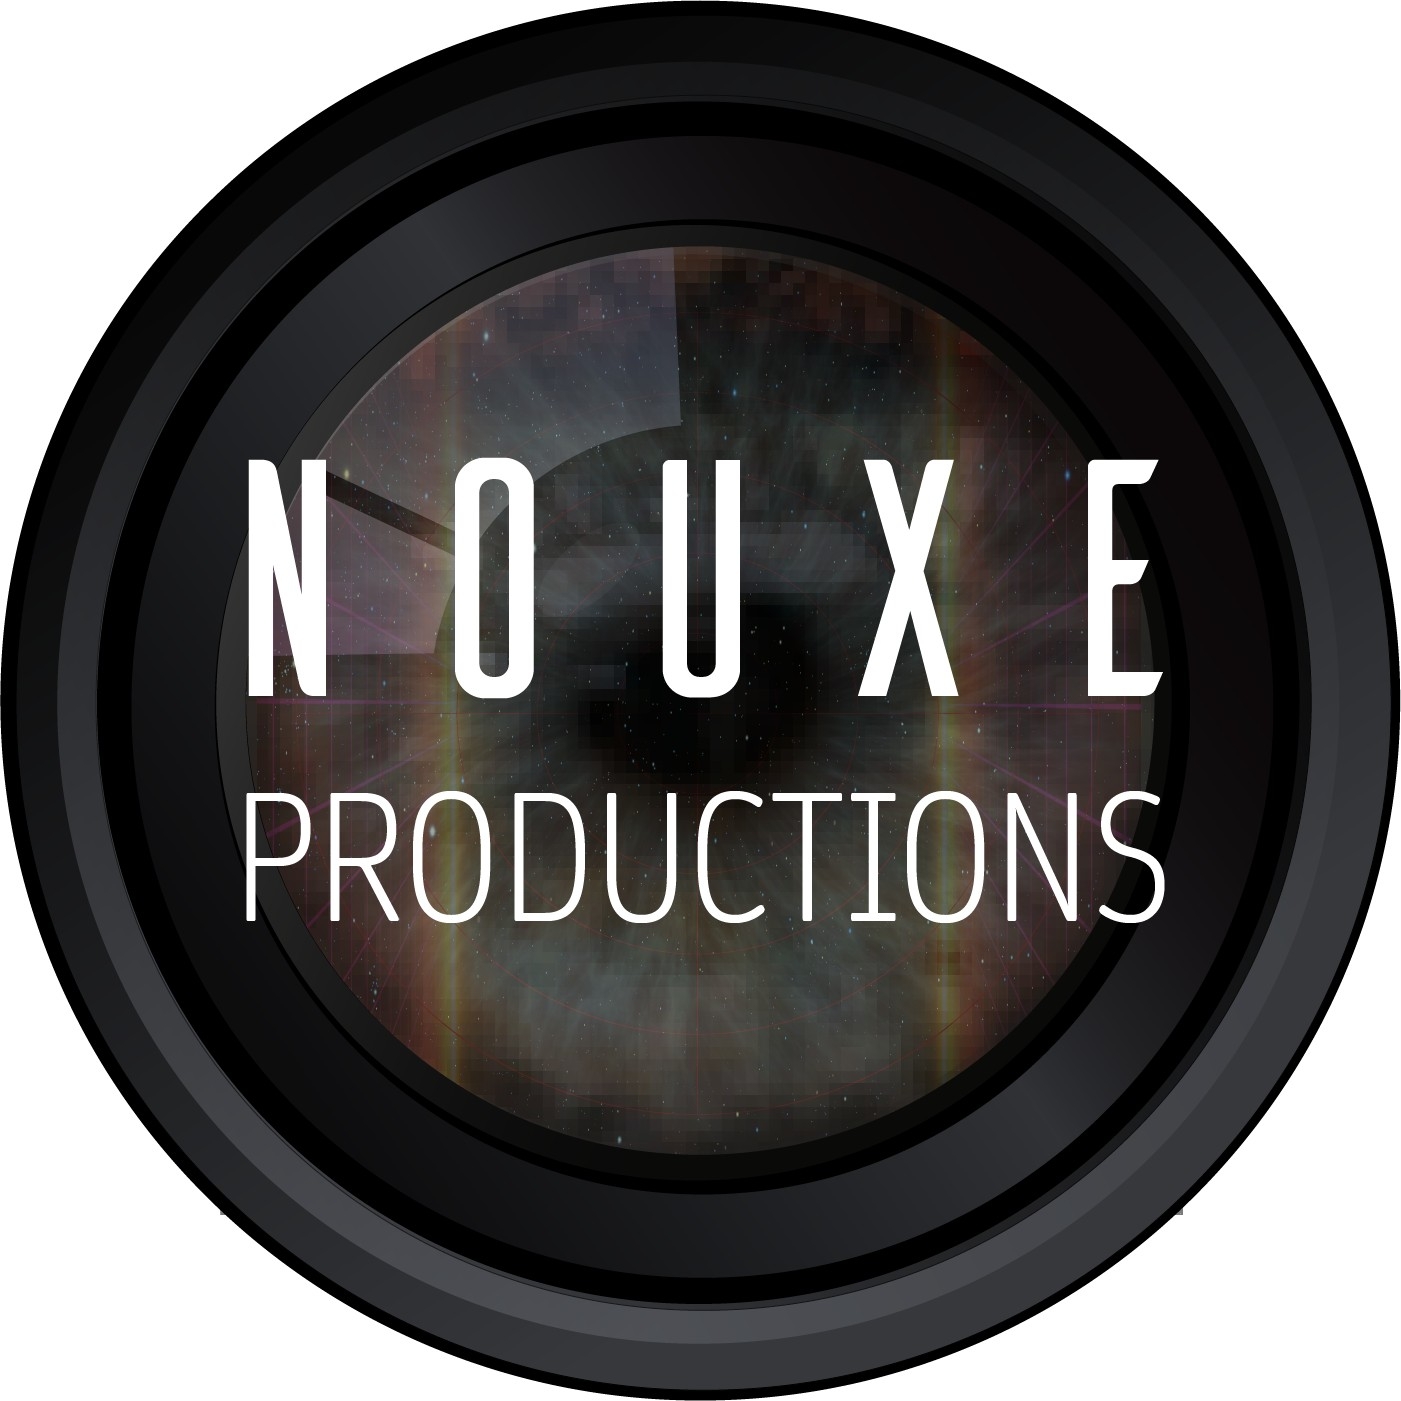 Nouxe Productions